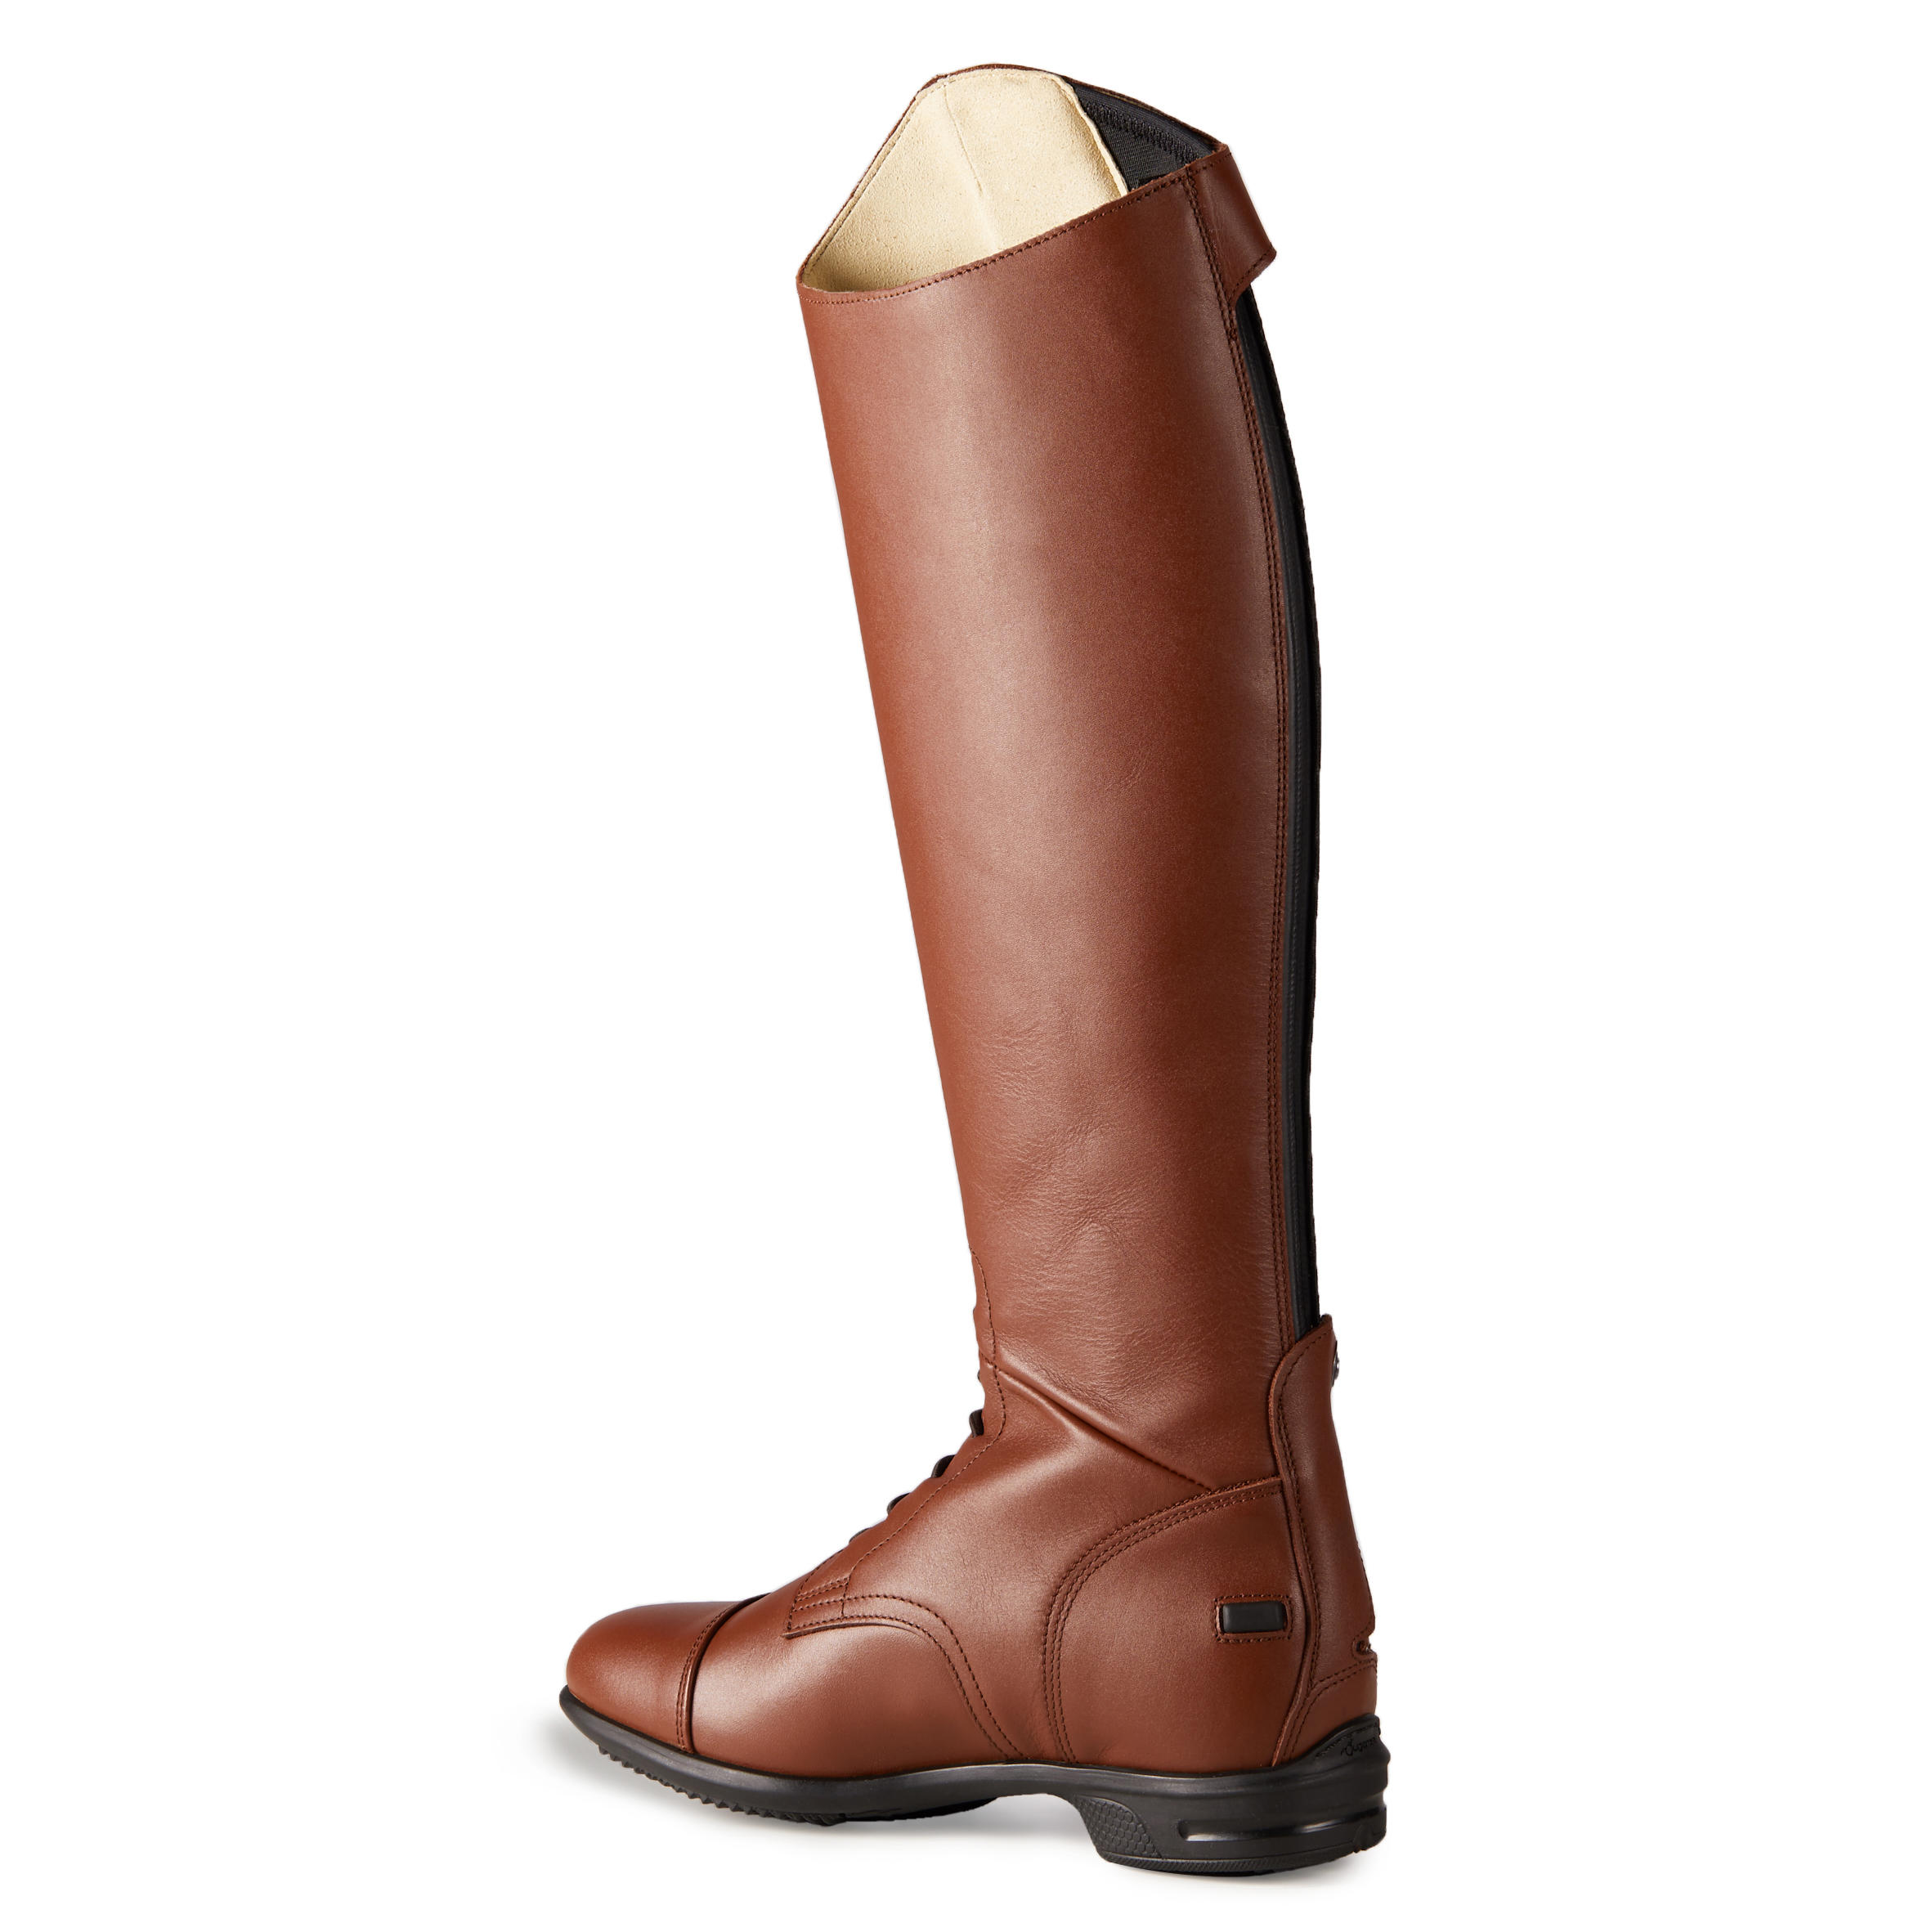 900 Jump M Adult Horse Riding Leather Long Boots - Brown 4/16